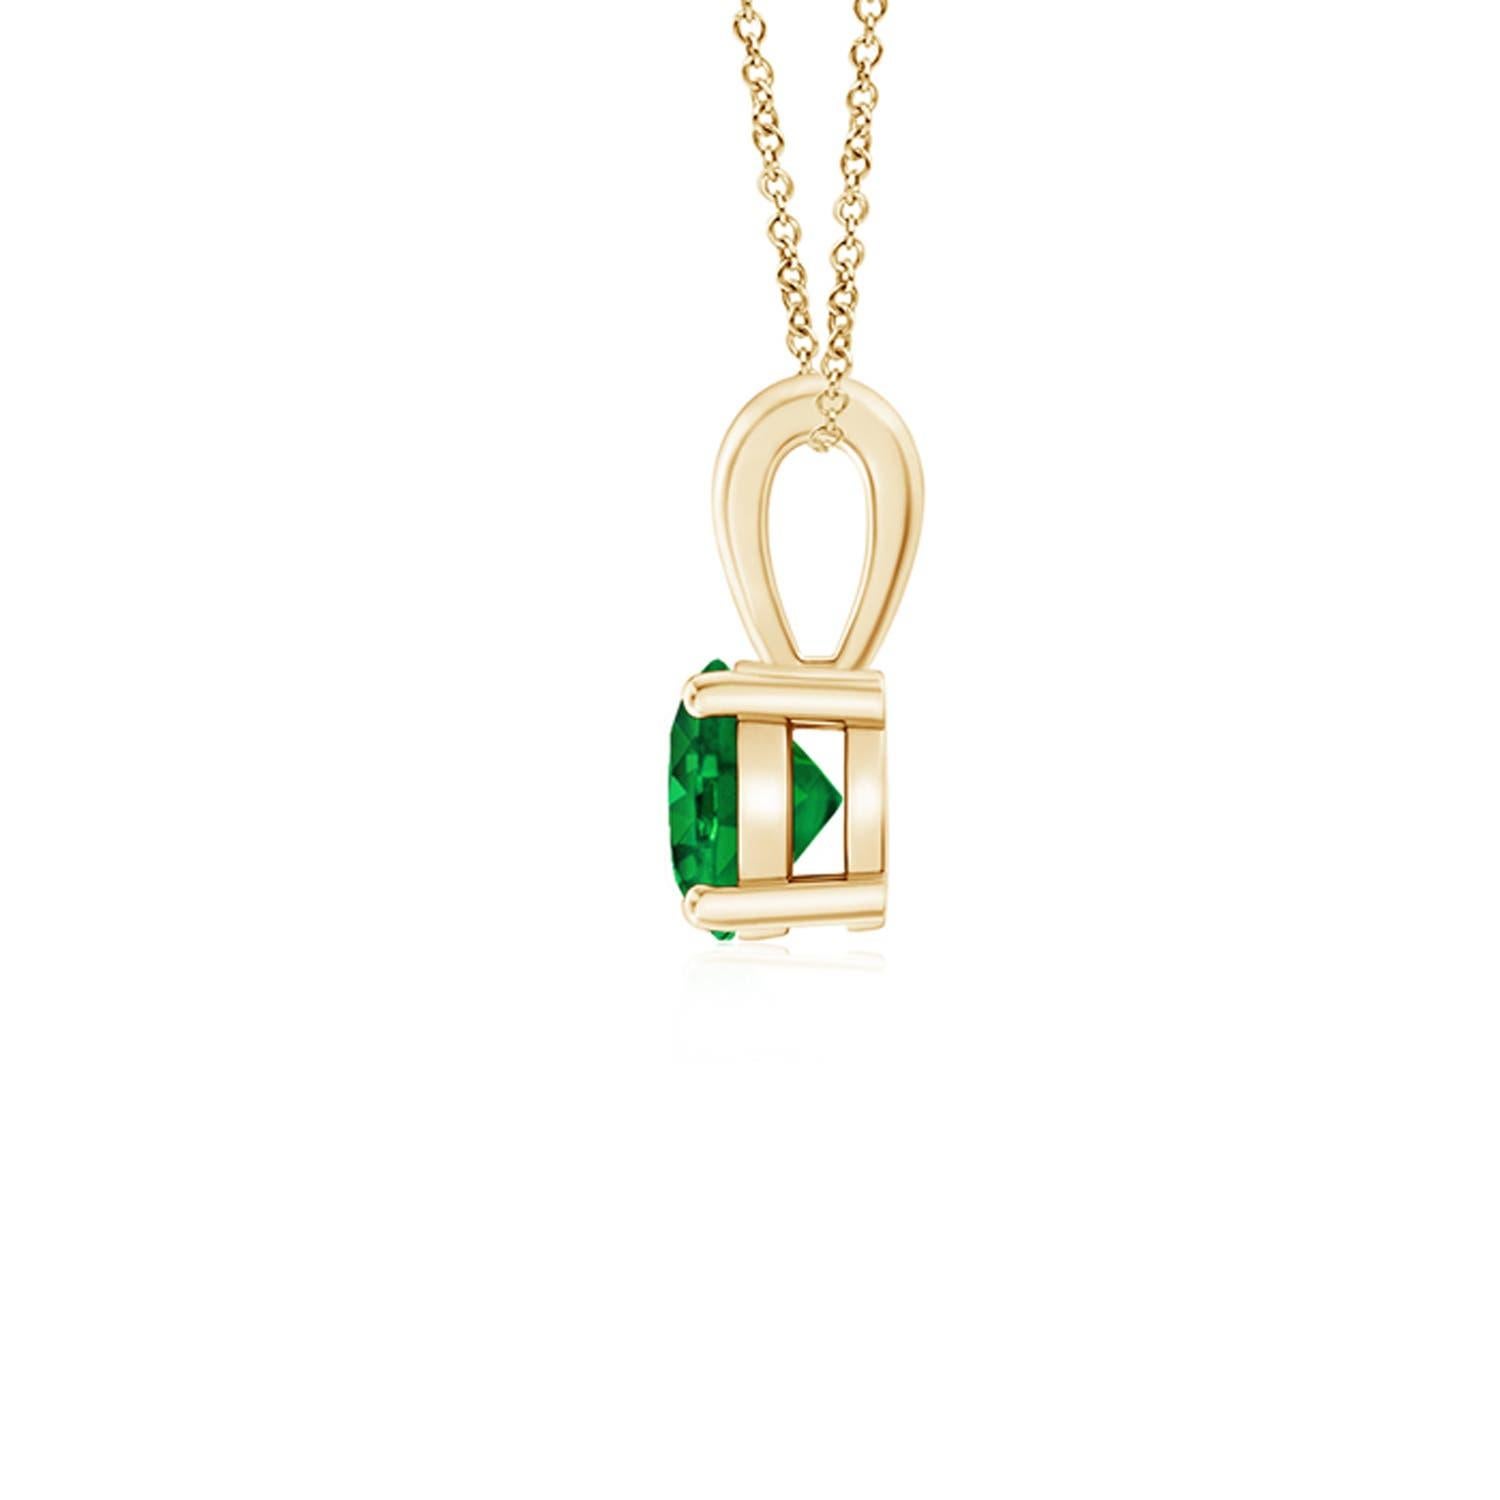 Linked to a lustrous bale is a lush green emerald solitaire secured in a four prong setting. Crafted in 14k yellow gold, the elegant design of this classic emerald pendant draws all attention towards the magnificence of the center stone.
Emerald is